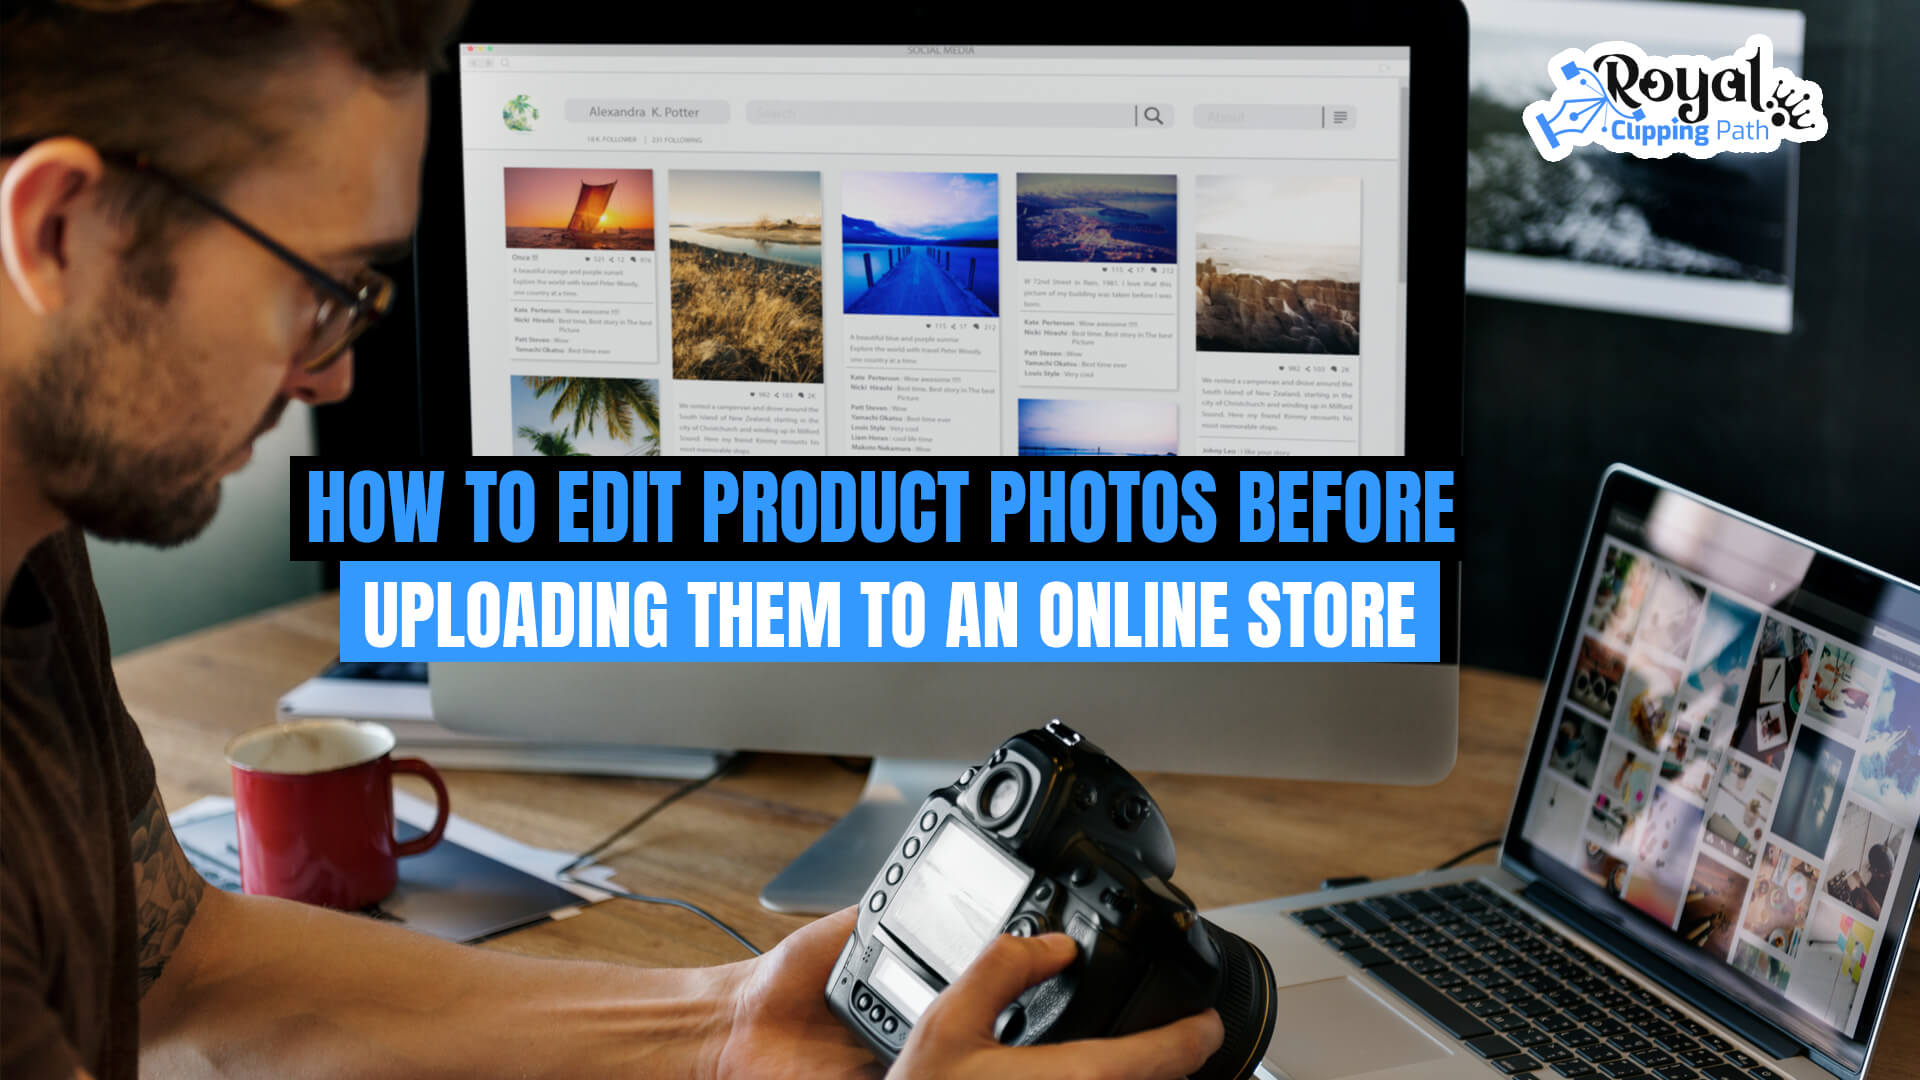 How to Edit Product Photos Before Uploading Them to an Online Store